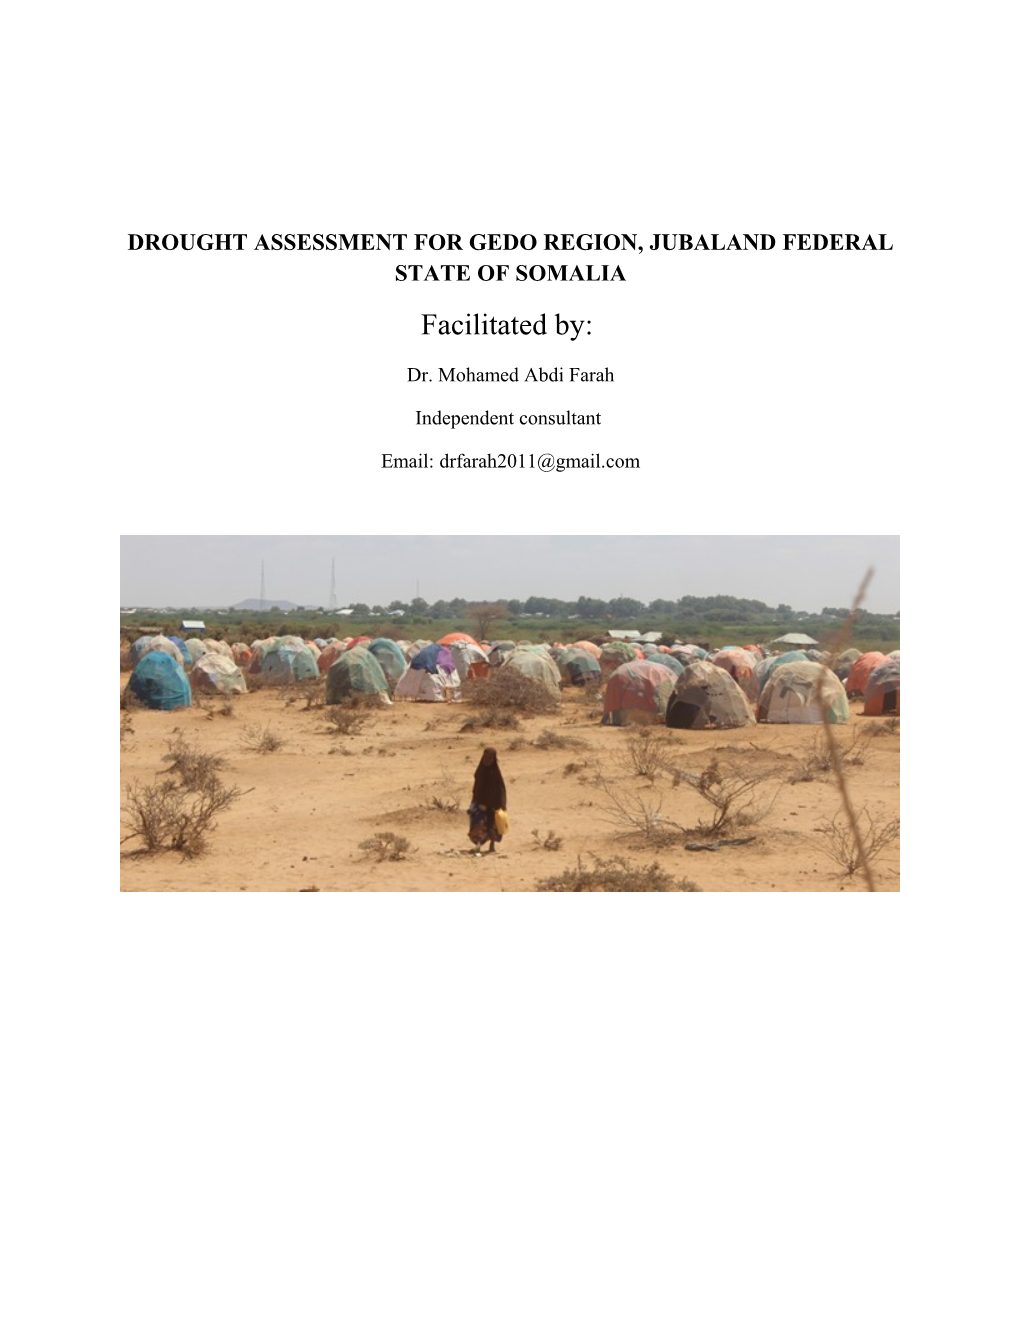 Drought Assessment for Gedo Region, Jubaland Federal State of Somalia